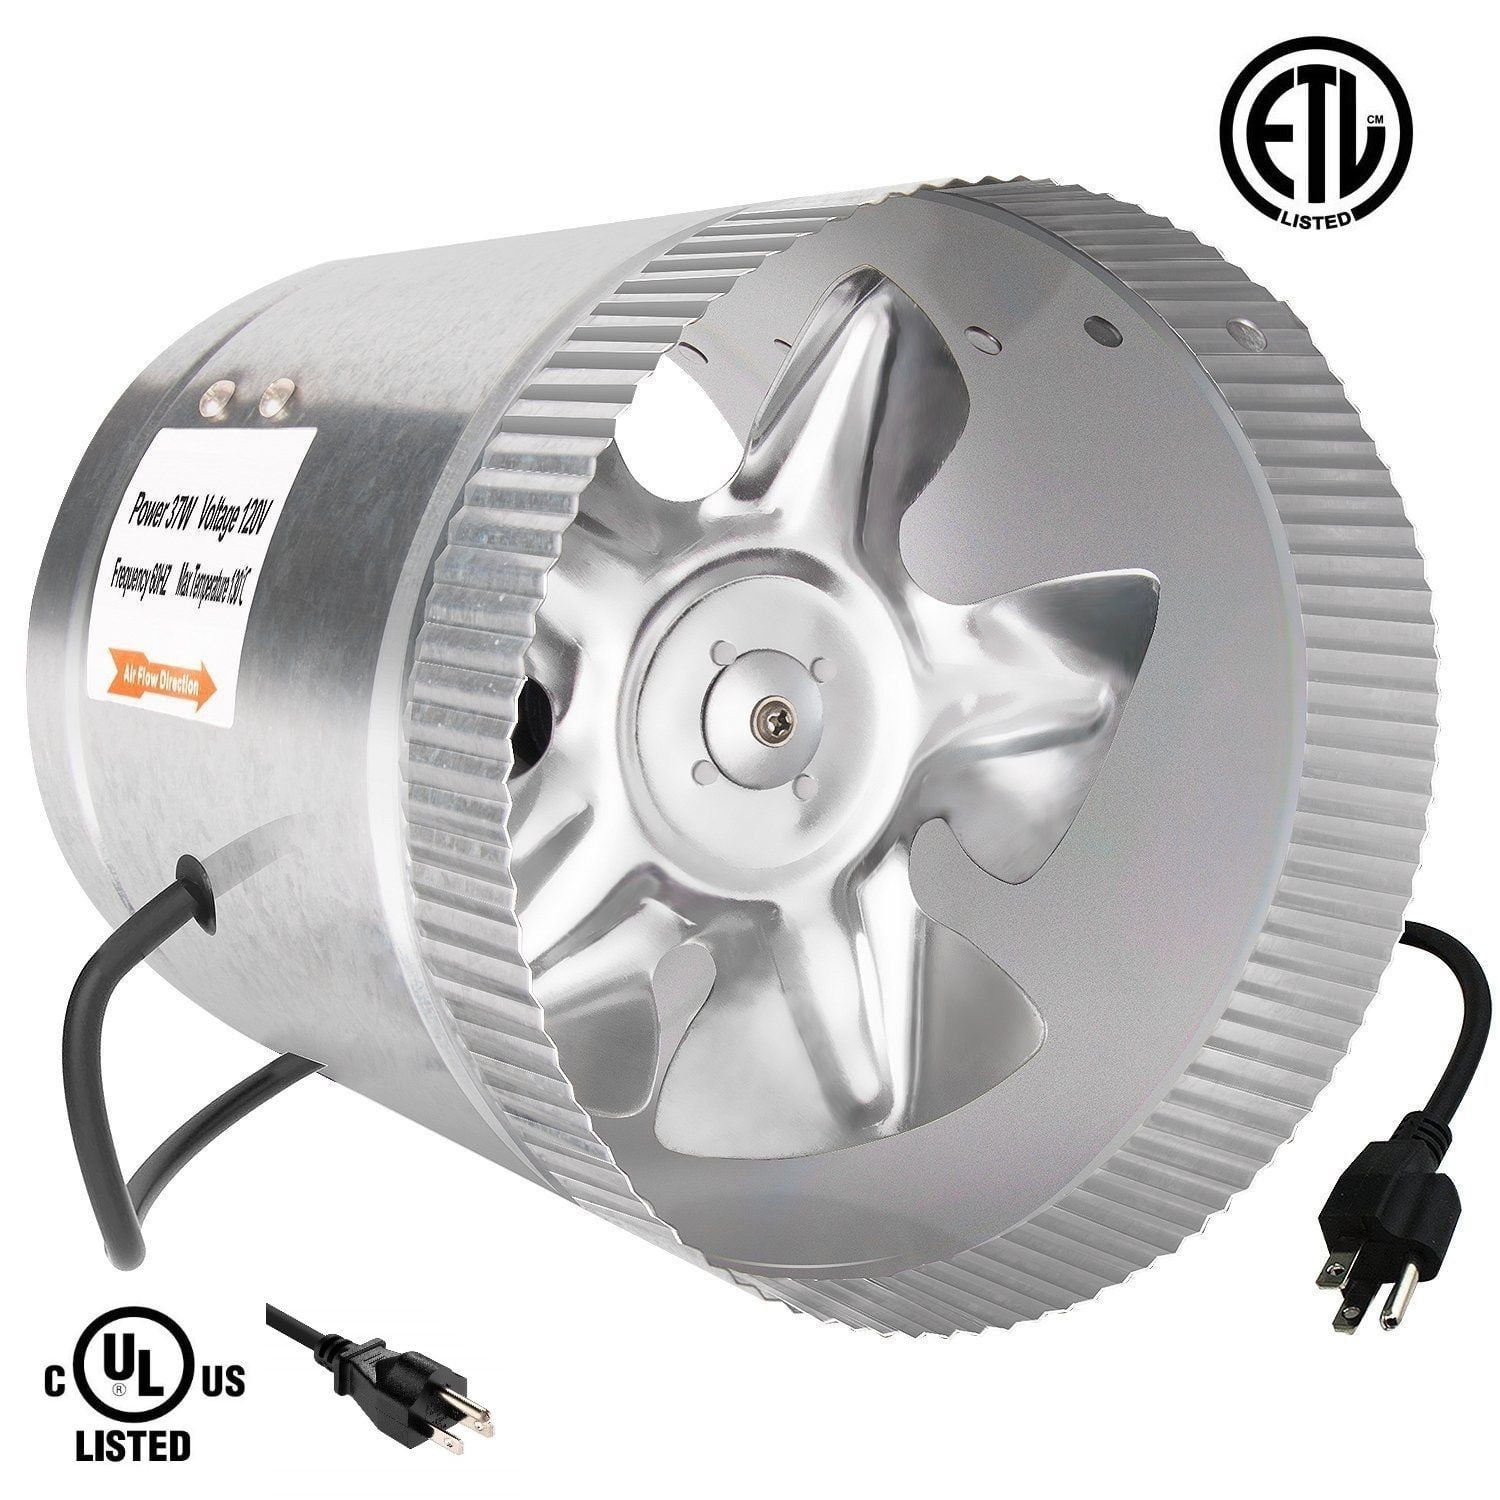 6" Duct Booster Inline Blower Vent Fan Venting Exhaust Air Cooling Basements 